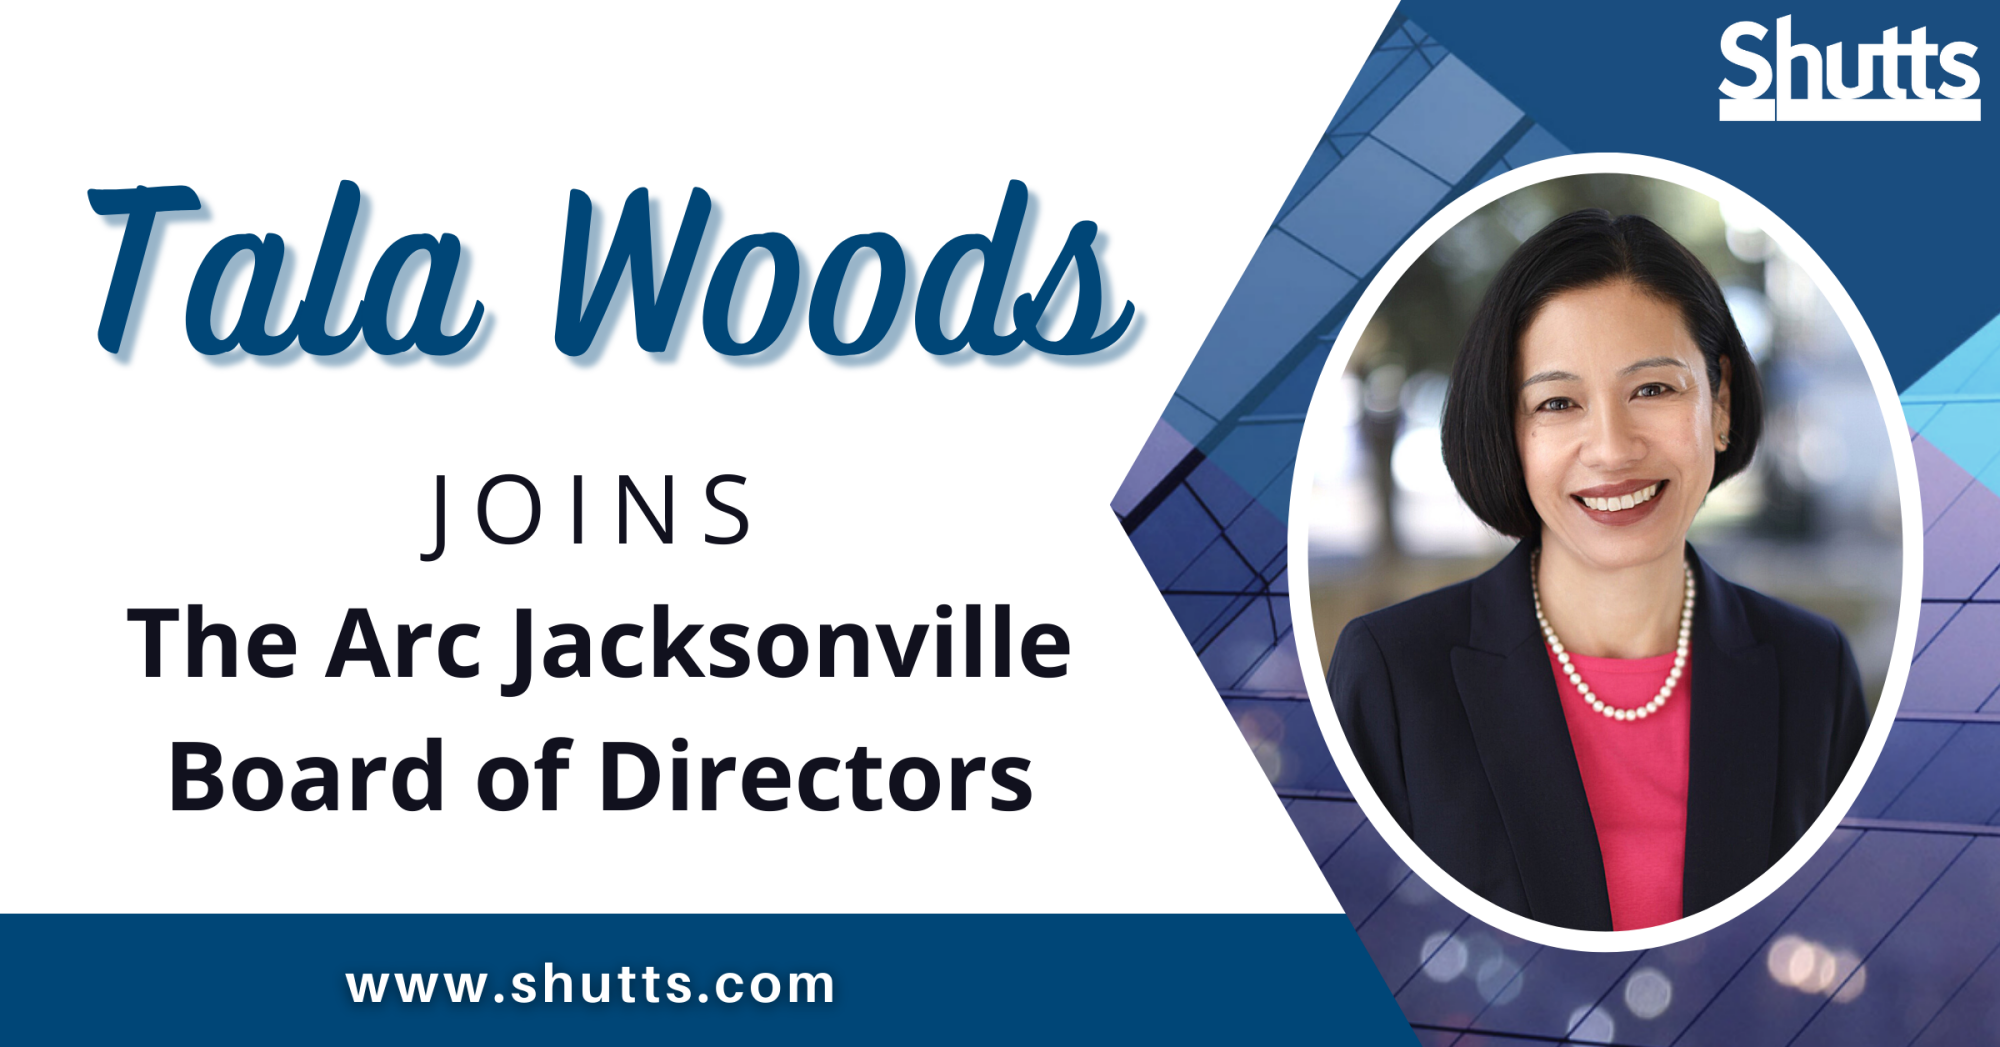 Tala Woods Joins The Arc Jacksonville Board of Directors